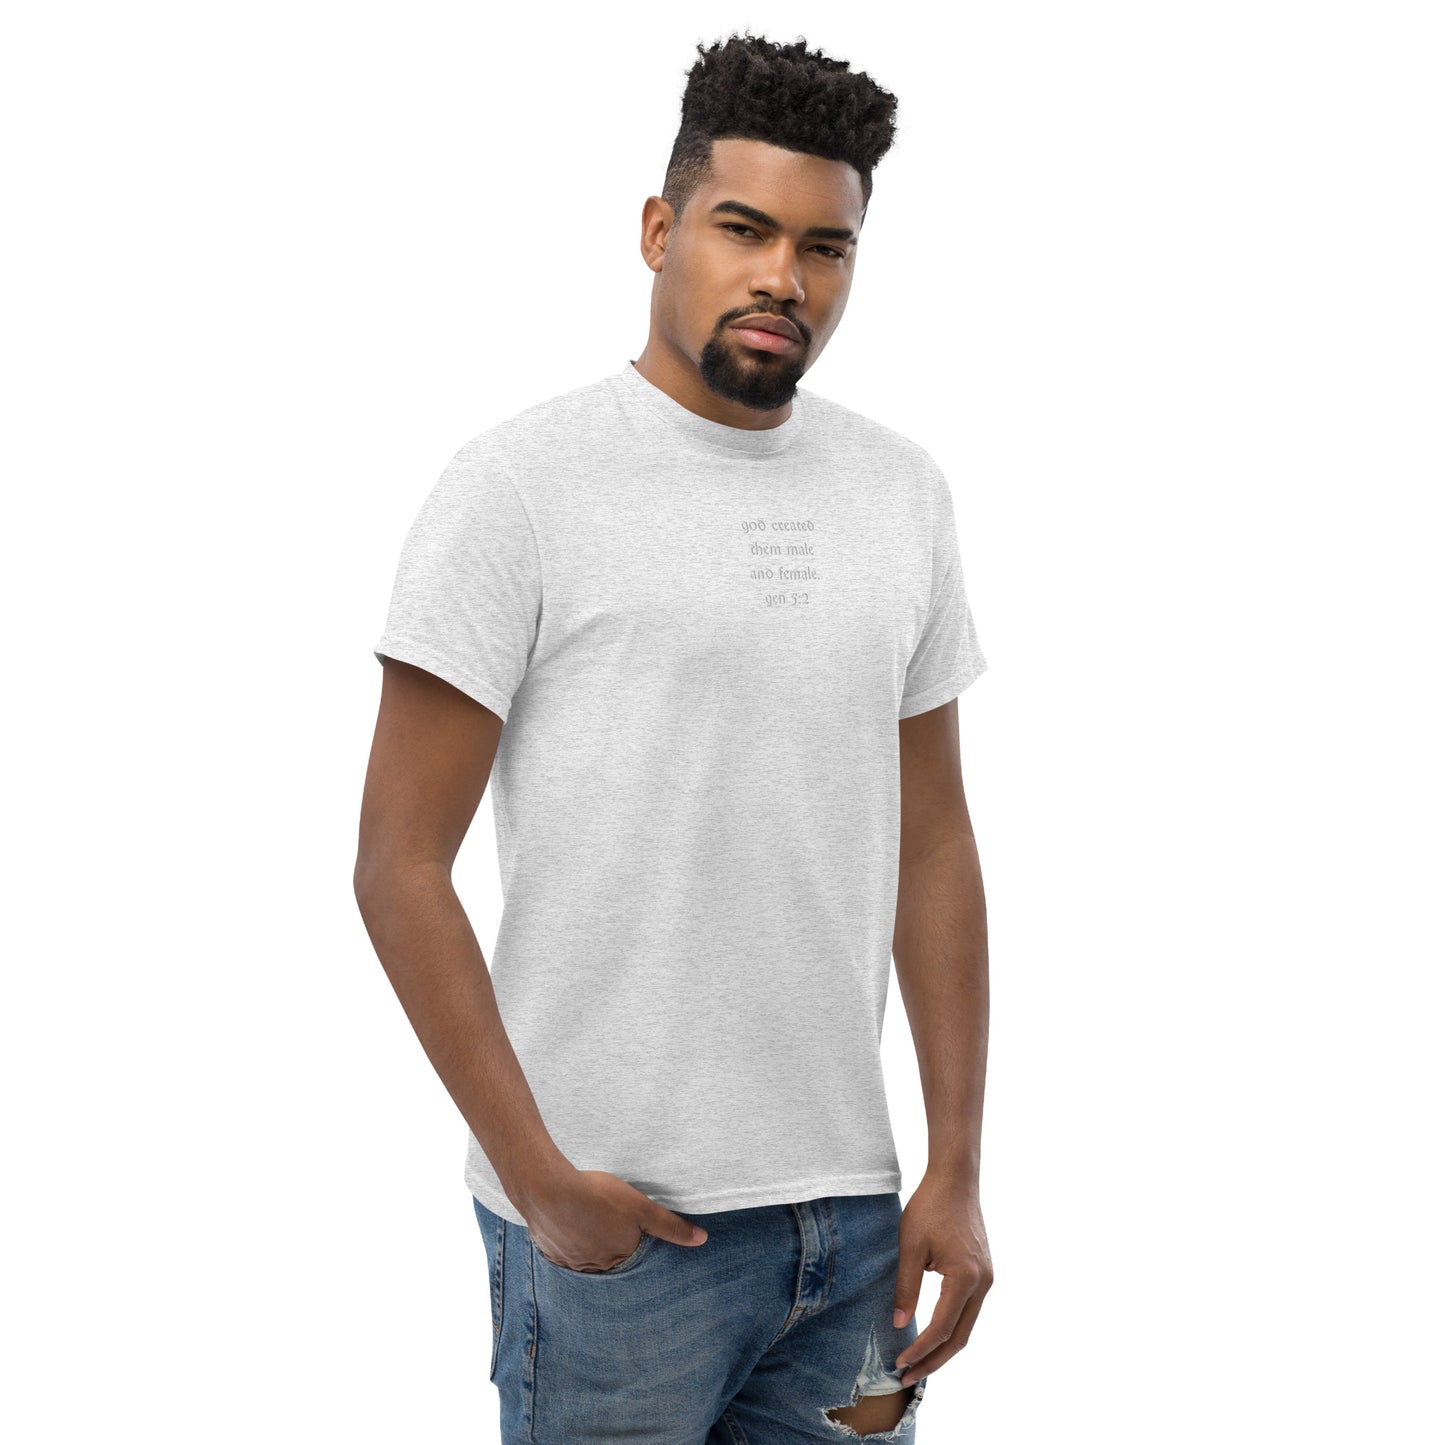 0-A-00 god created them male and female. gen 52 Men's classic tee